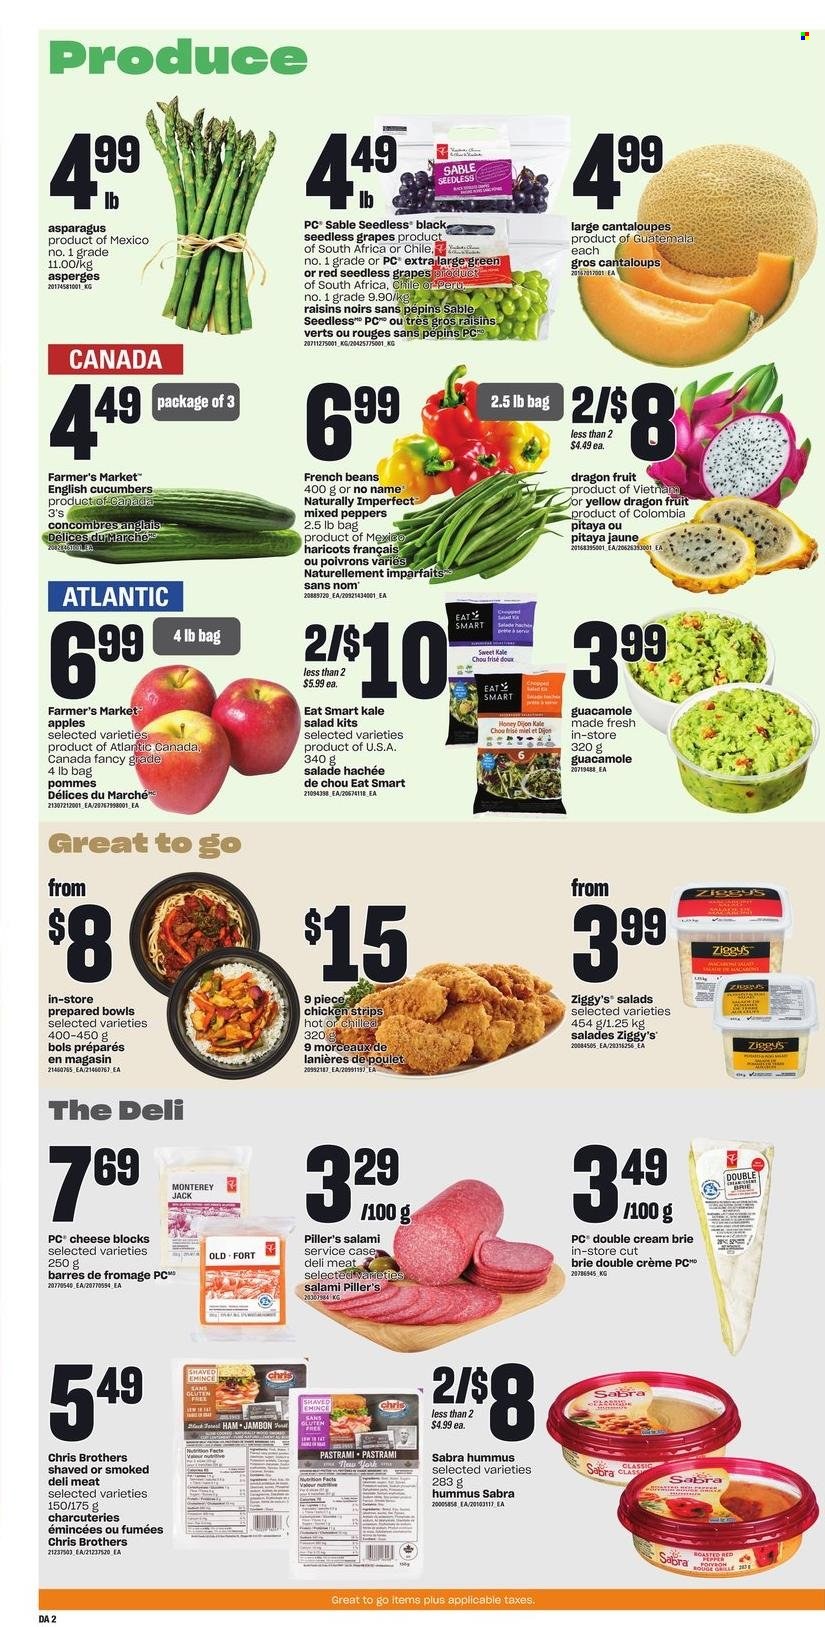 thumbnail - Dominion Flyer - March 16, 2023 - March 22, 2023 - Sales products - asparagus, beans, cantaloupe, cucumber, french beans, kale, salad, peppers, apples, grapes, seedless grapes, dragon fruit, No Name, macaroni, salami, ham, pastrami, hummus, guacamole, Monterey Jack cheese, cheese, brie, strips, chicken strips, honey, dried fruit, BROTHERS, beef meat, handy chopper, raisins. Page 2.